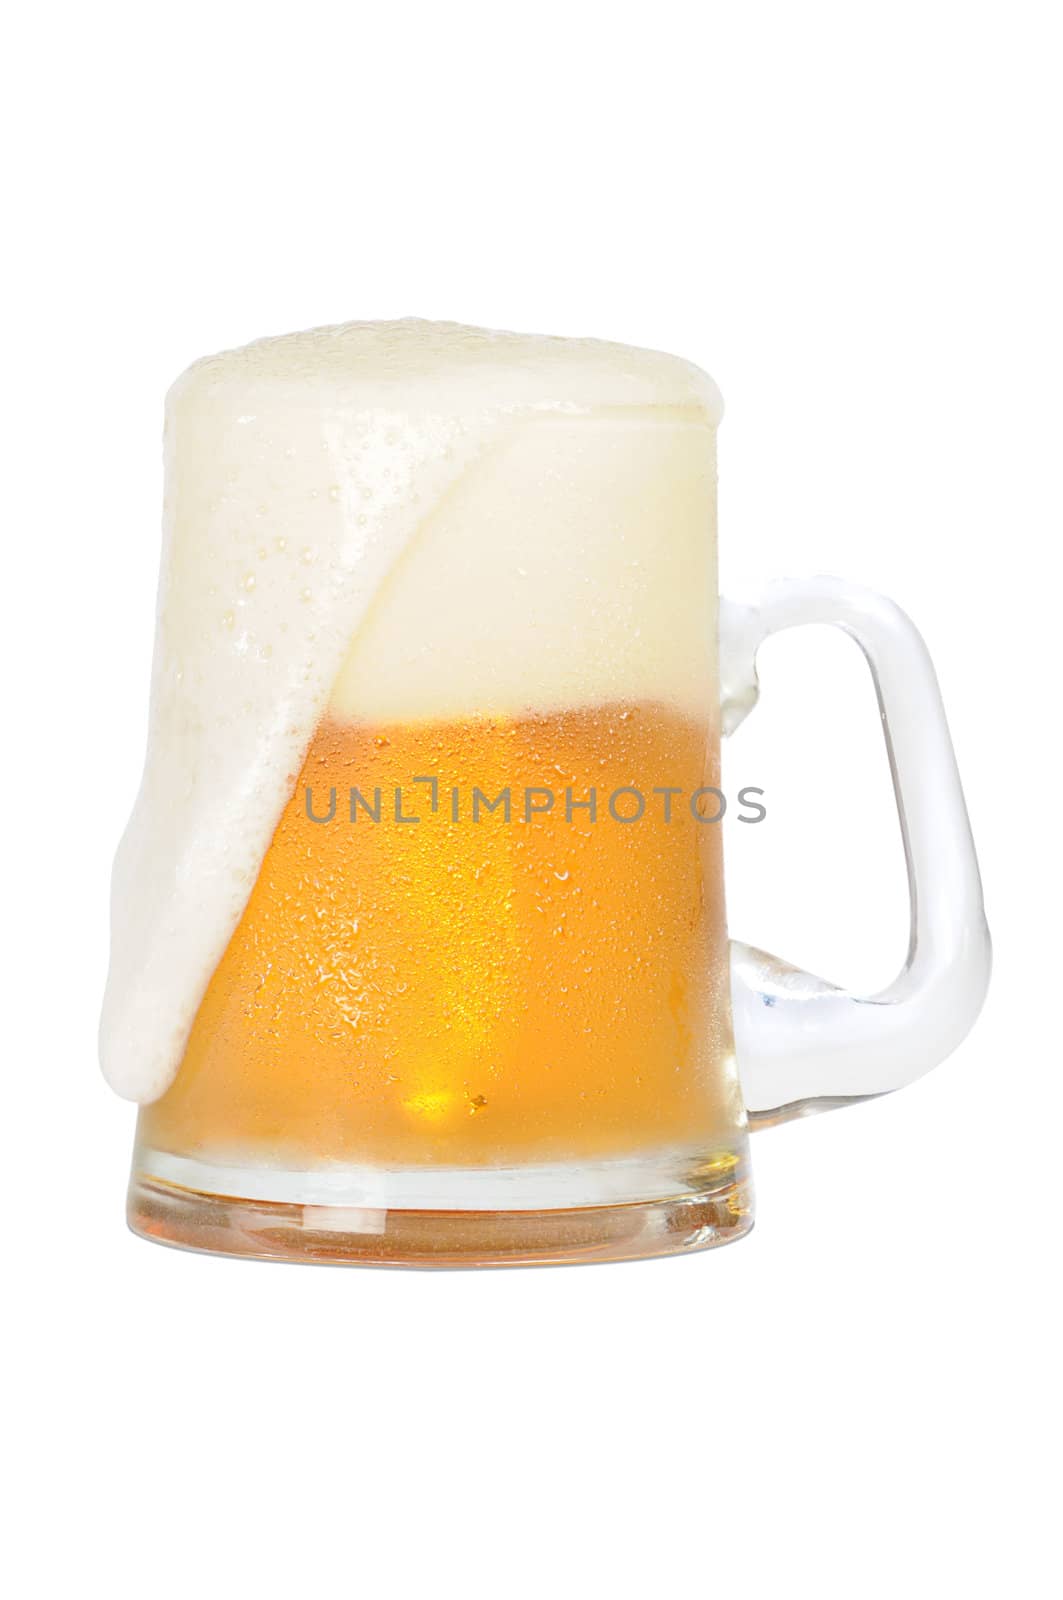 Cold beer mug on white background with path